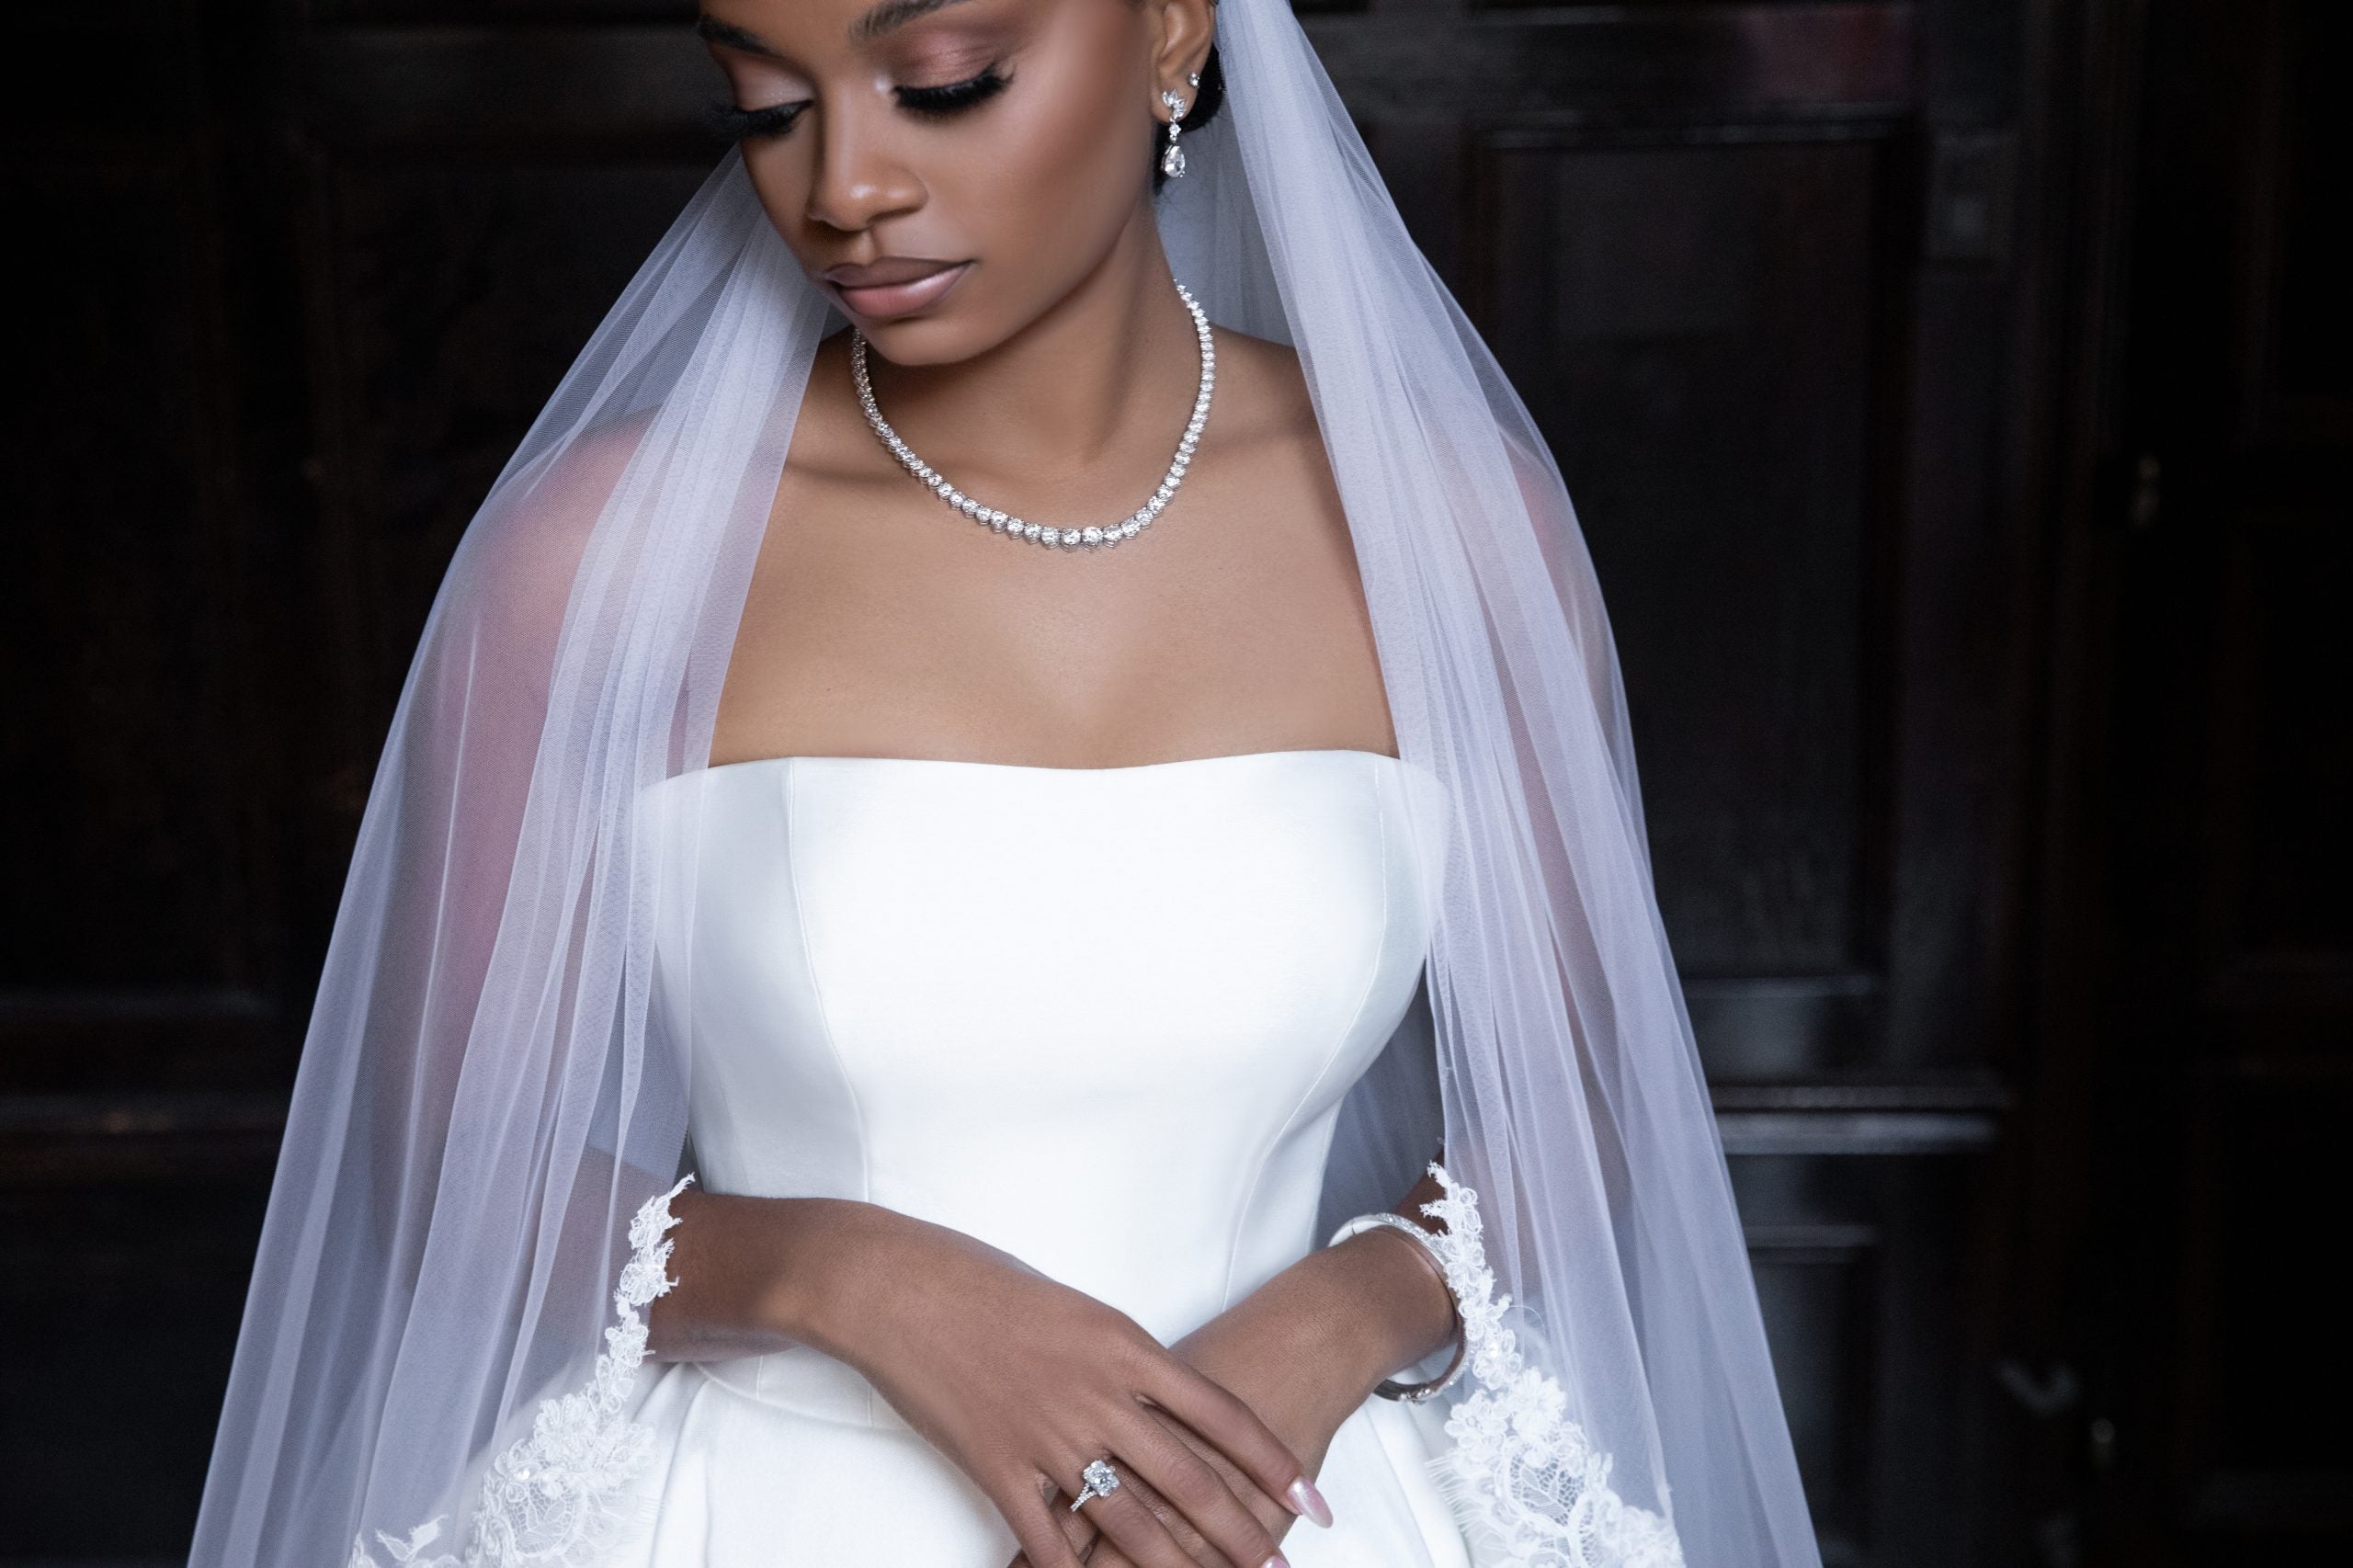 Bridal Bliss: Vanessa Bell Calloway's Daughter Ally Married Longtime Love Zach In A Star-Studded, 'Old Hollywood' Inspired Celebration